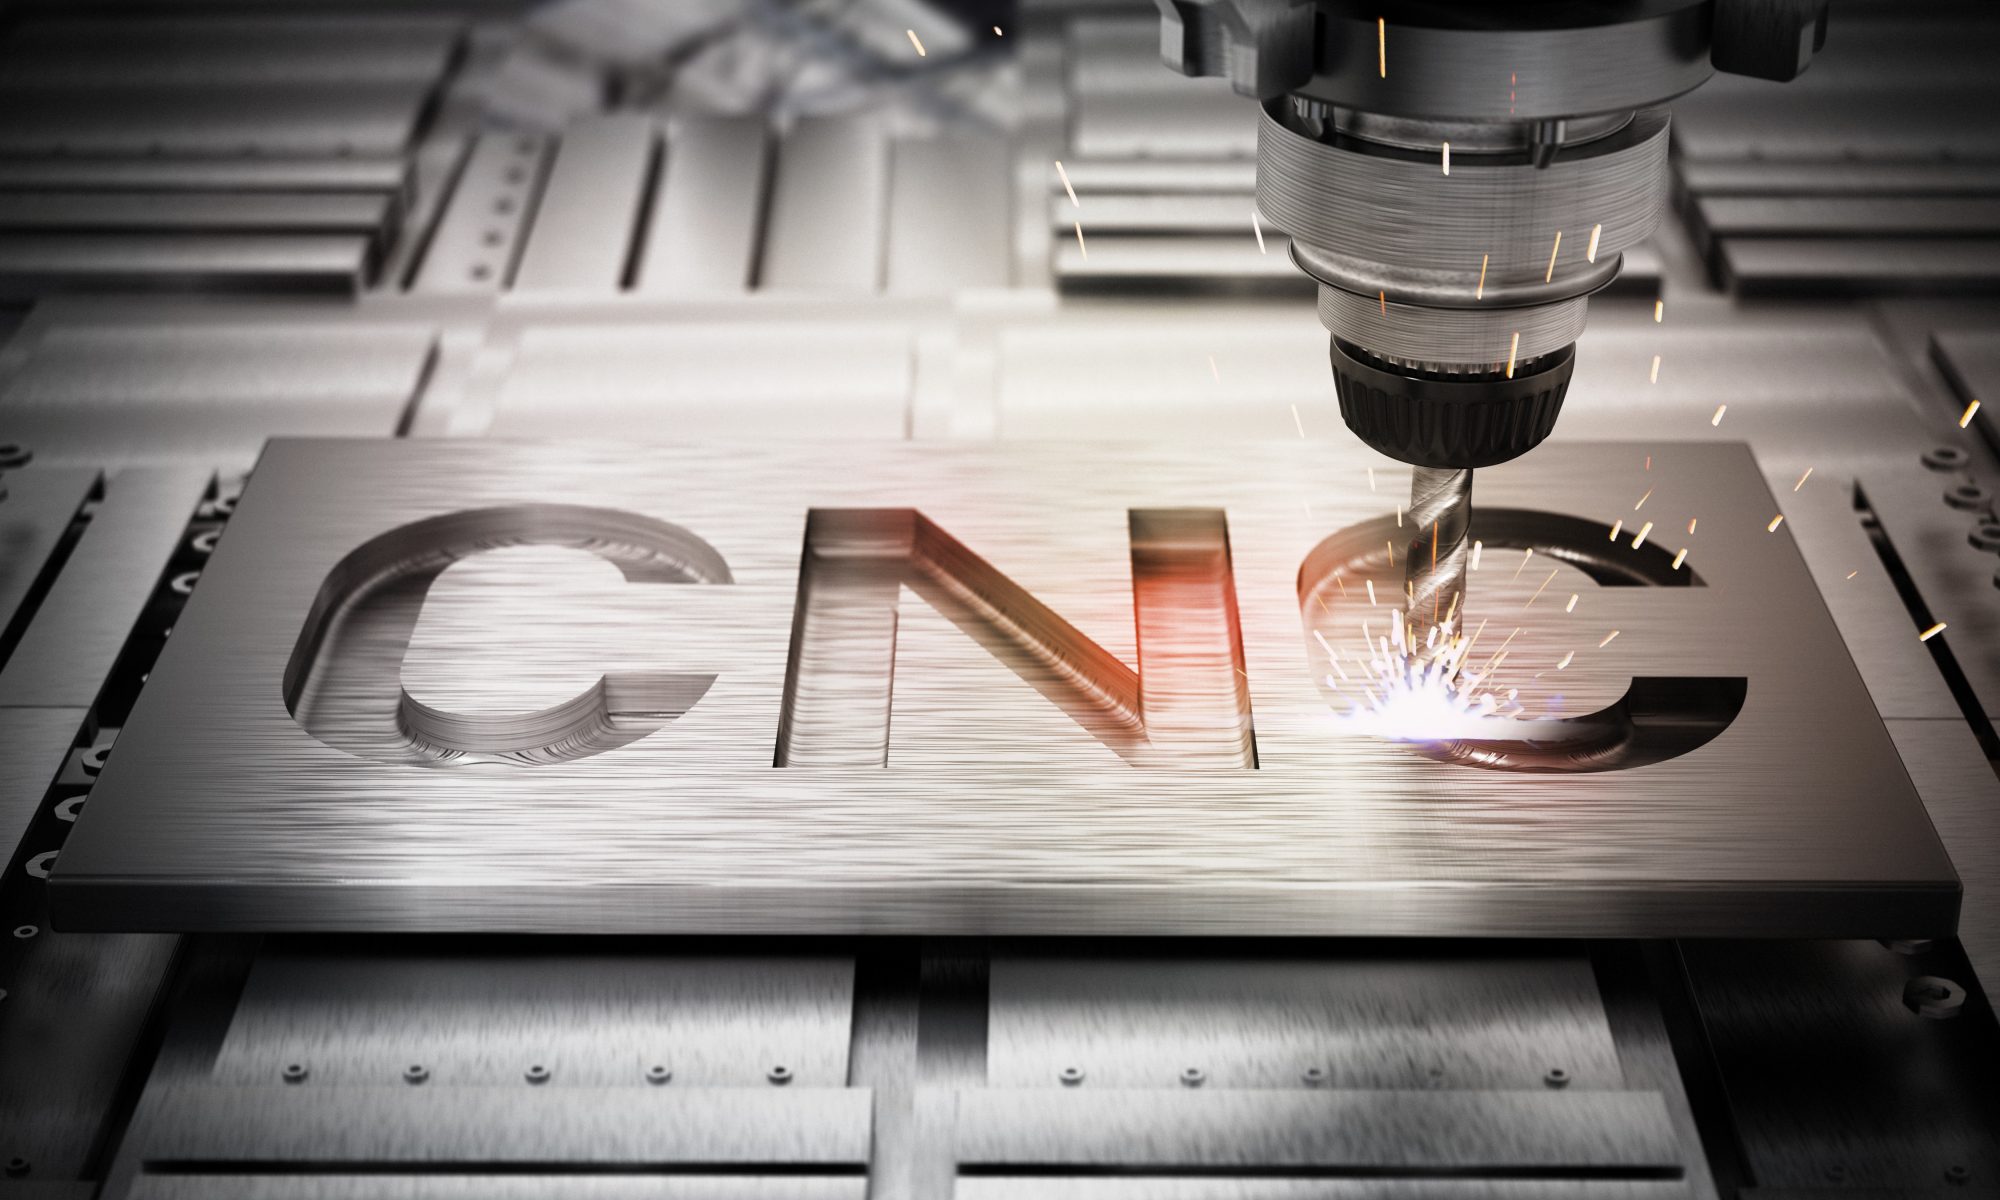 A cnc machine cutting metal letters with a drill.